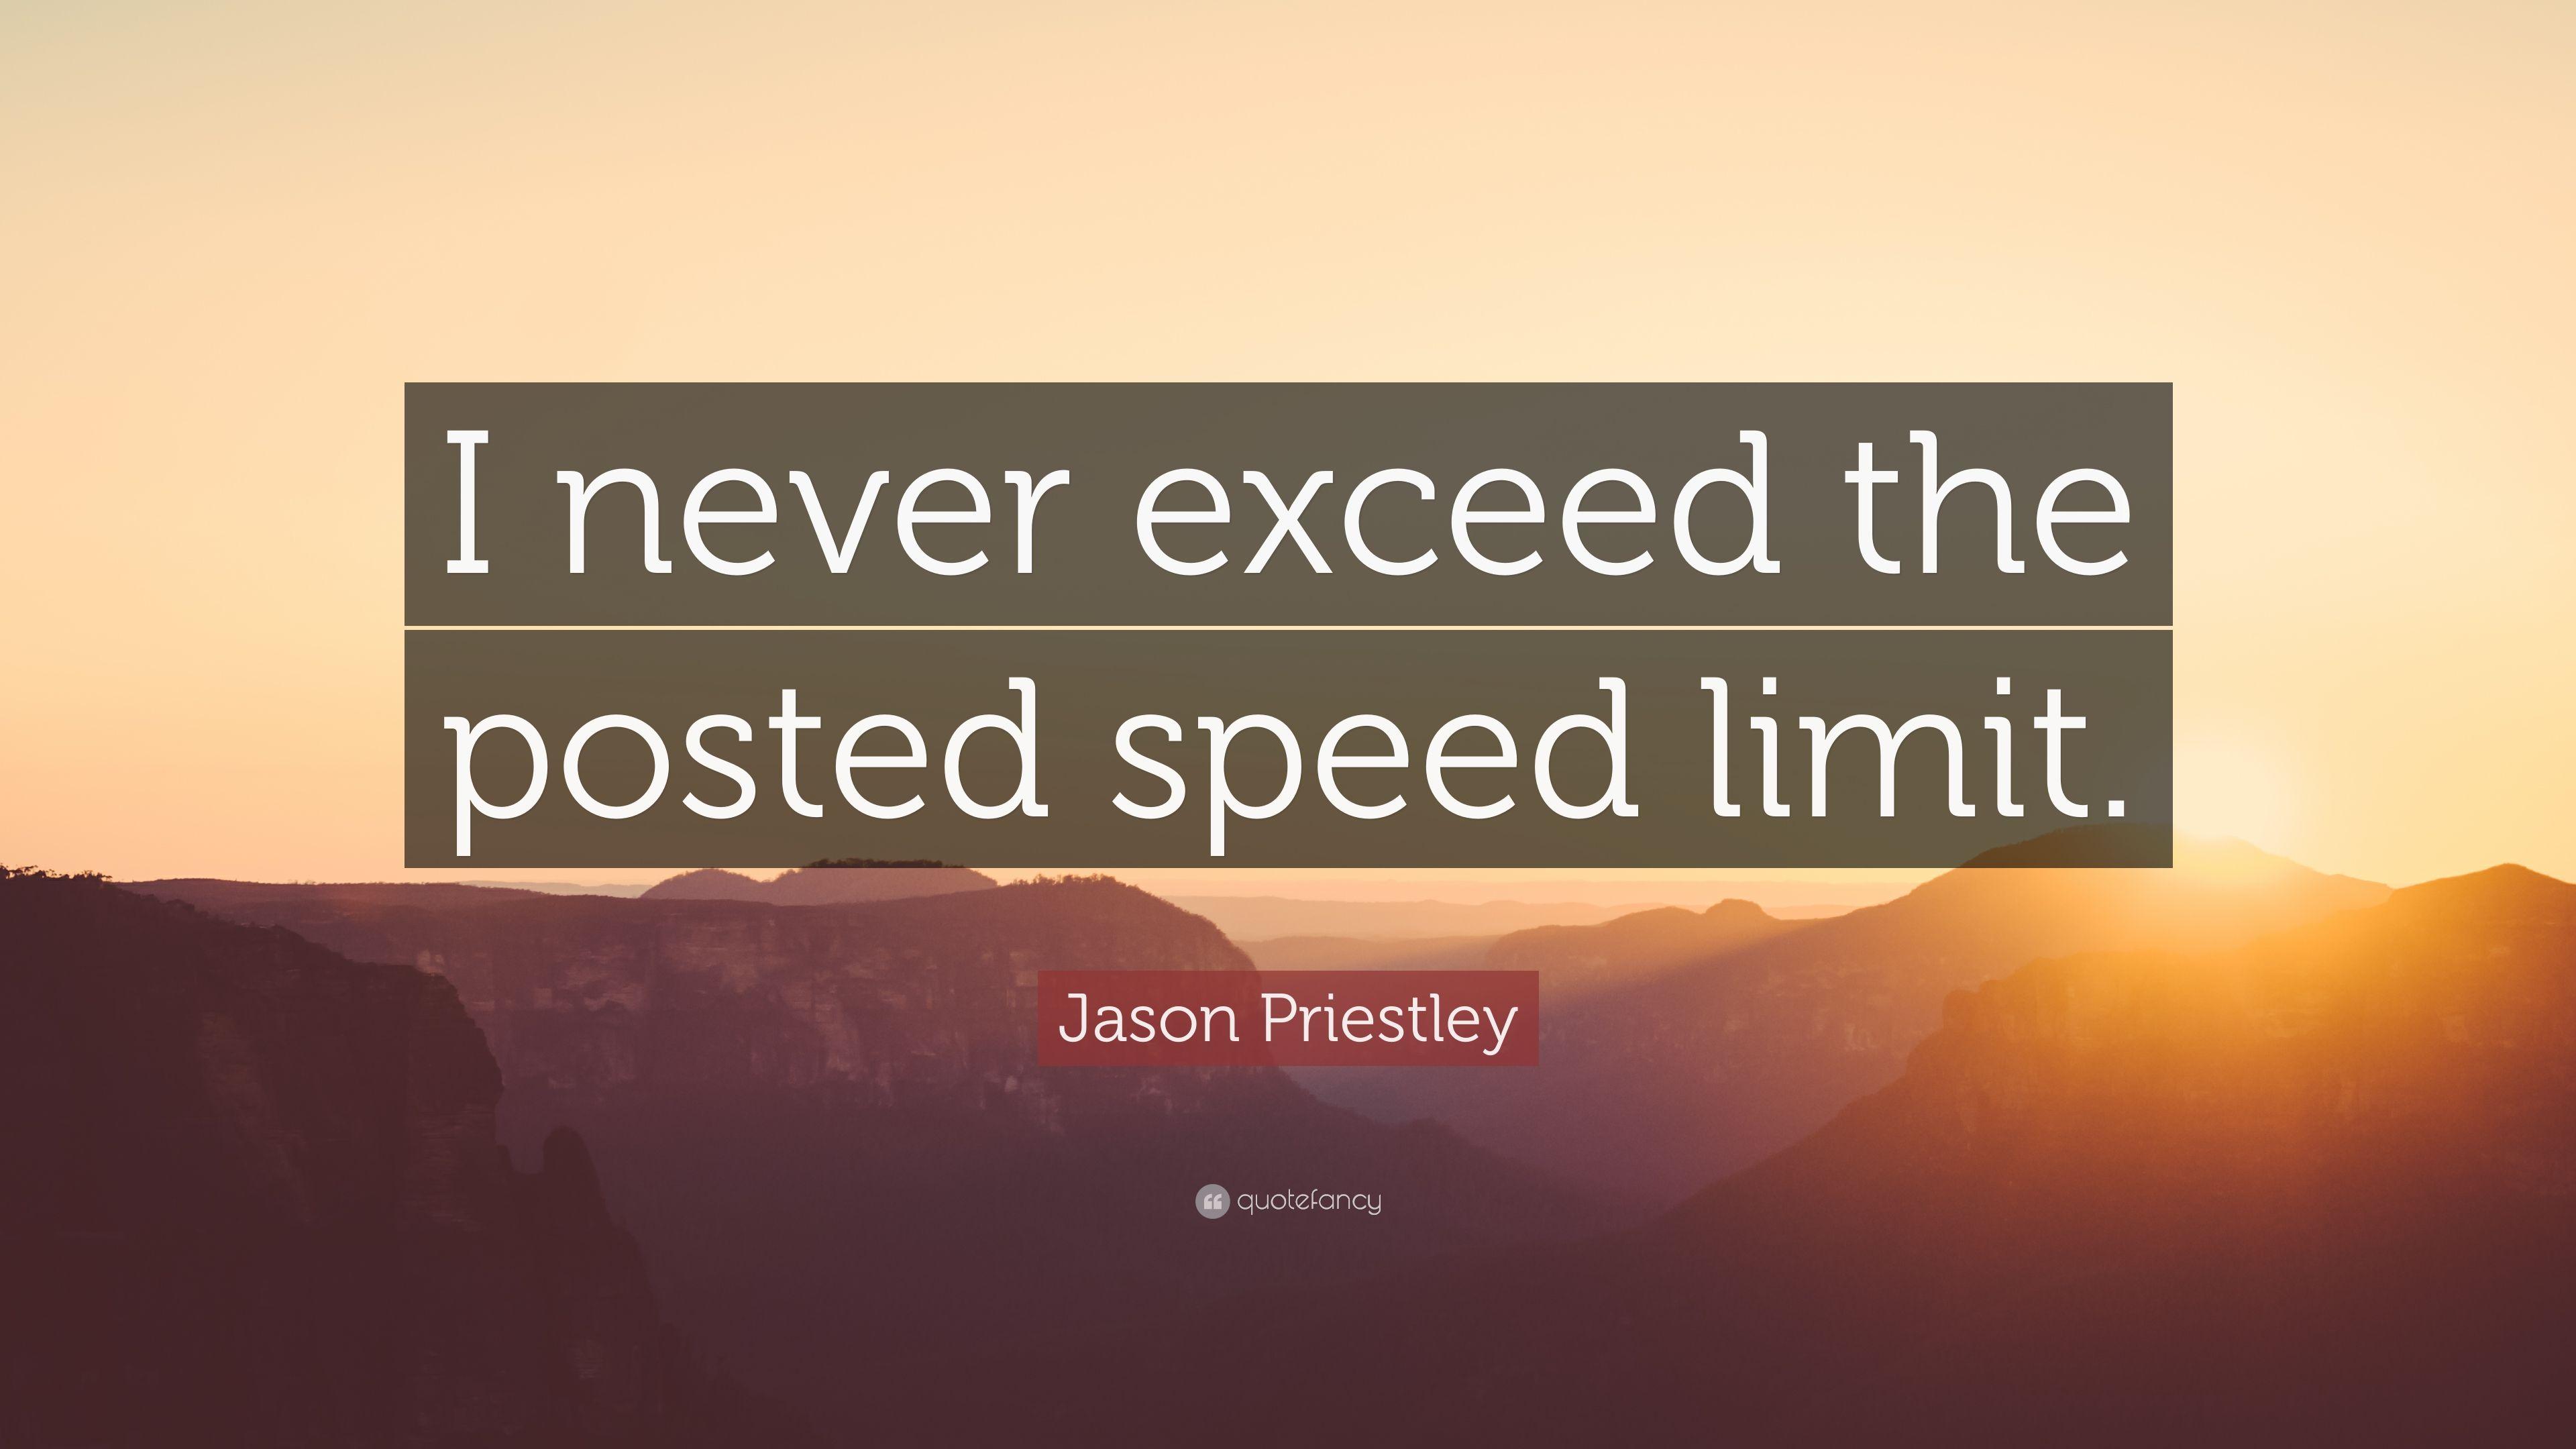 Jason Priestley Quote: “I never exceed the posted speed limit.” 7